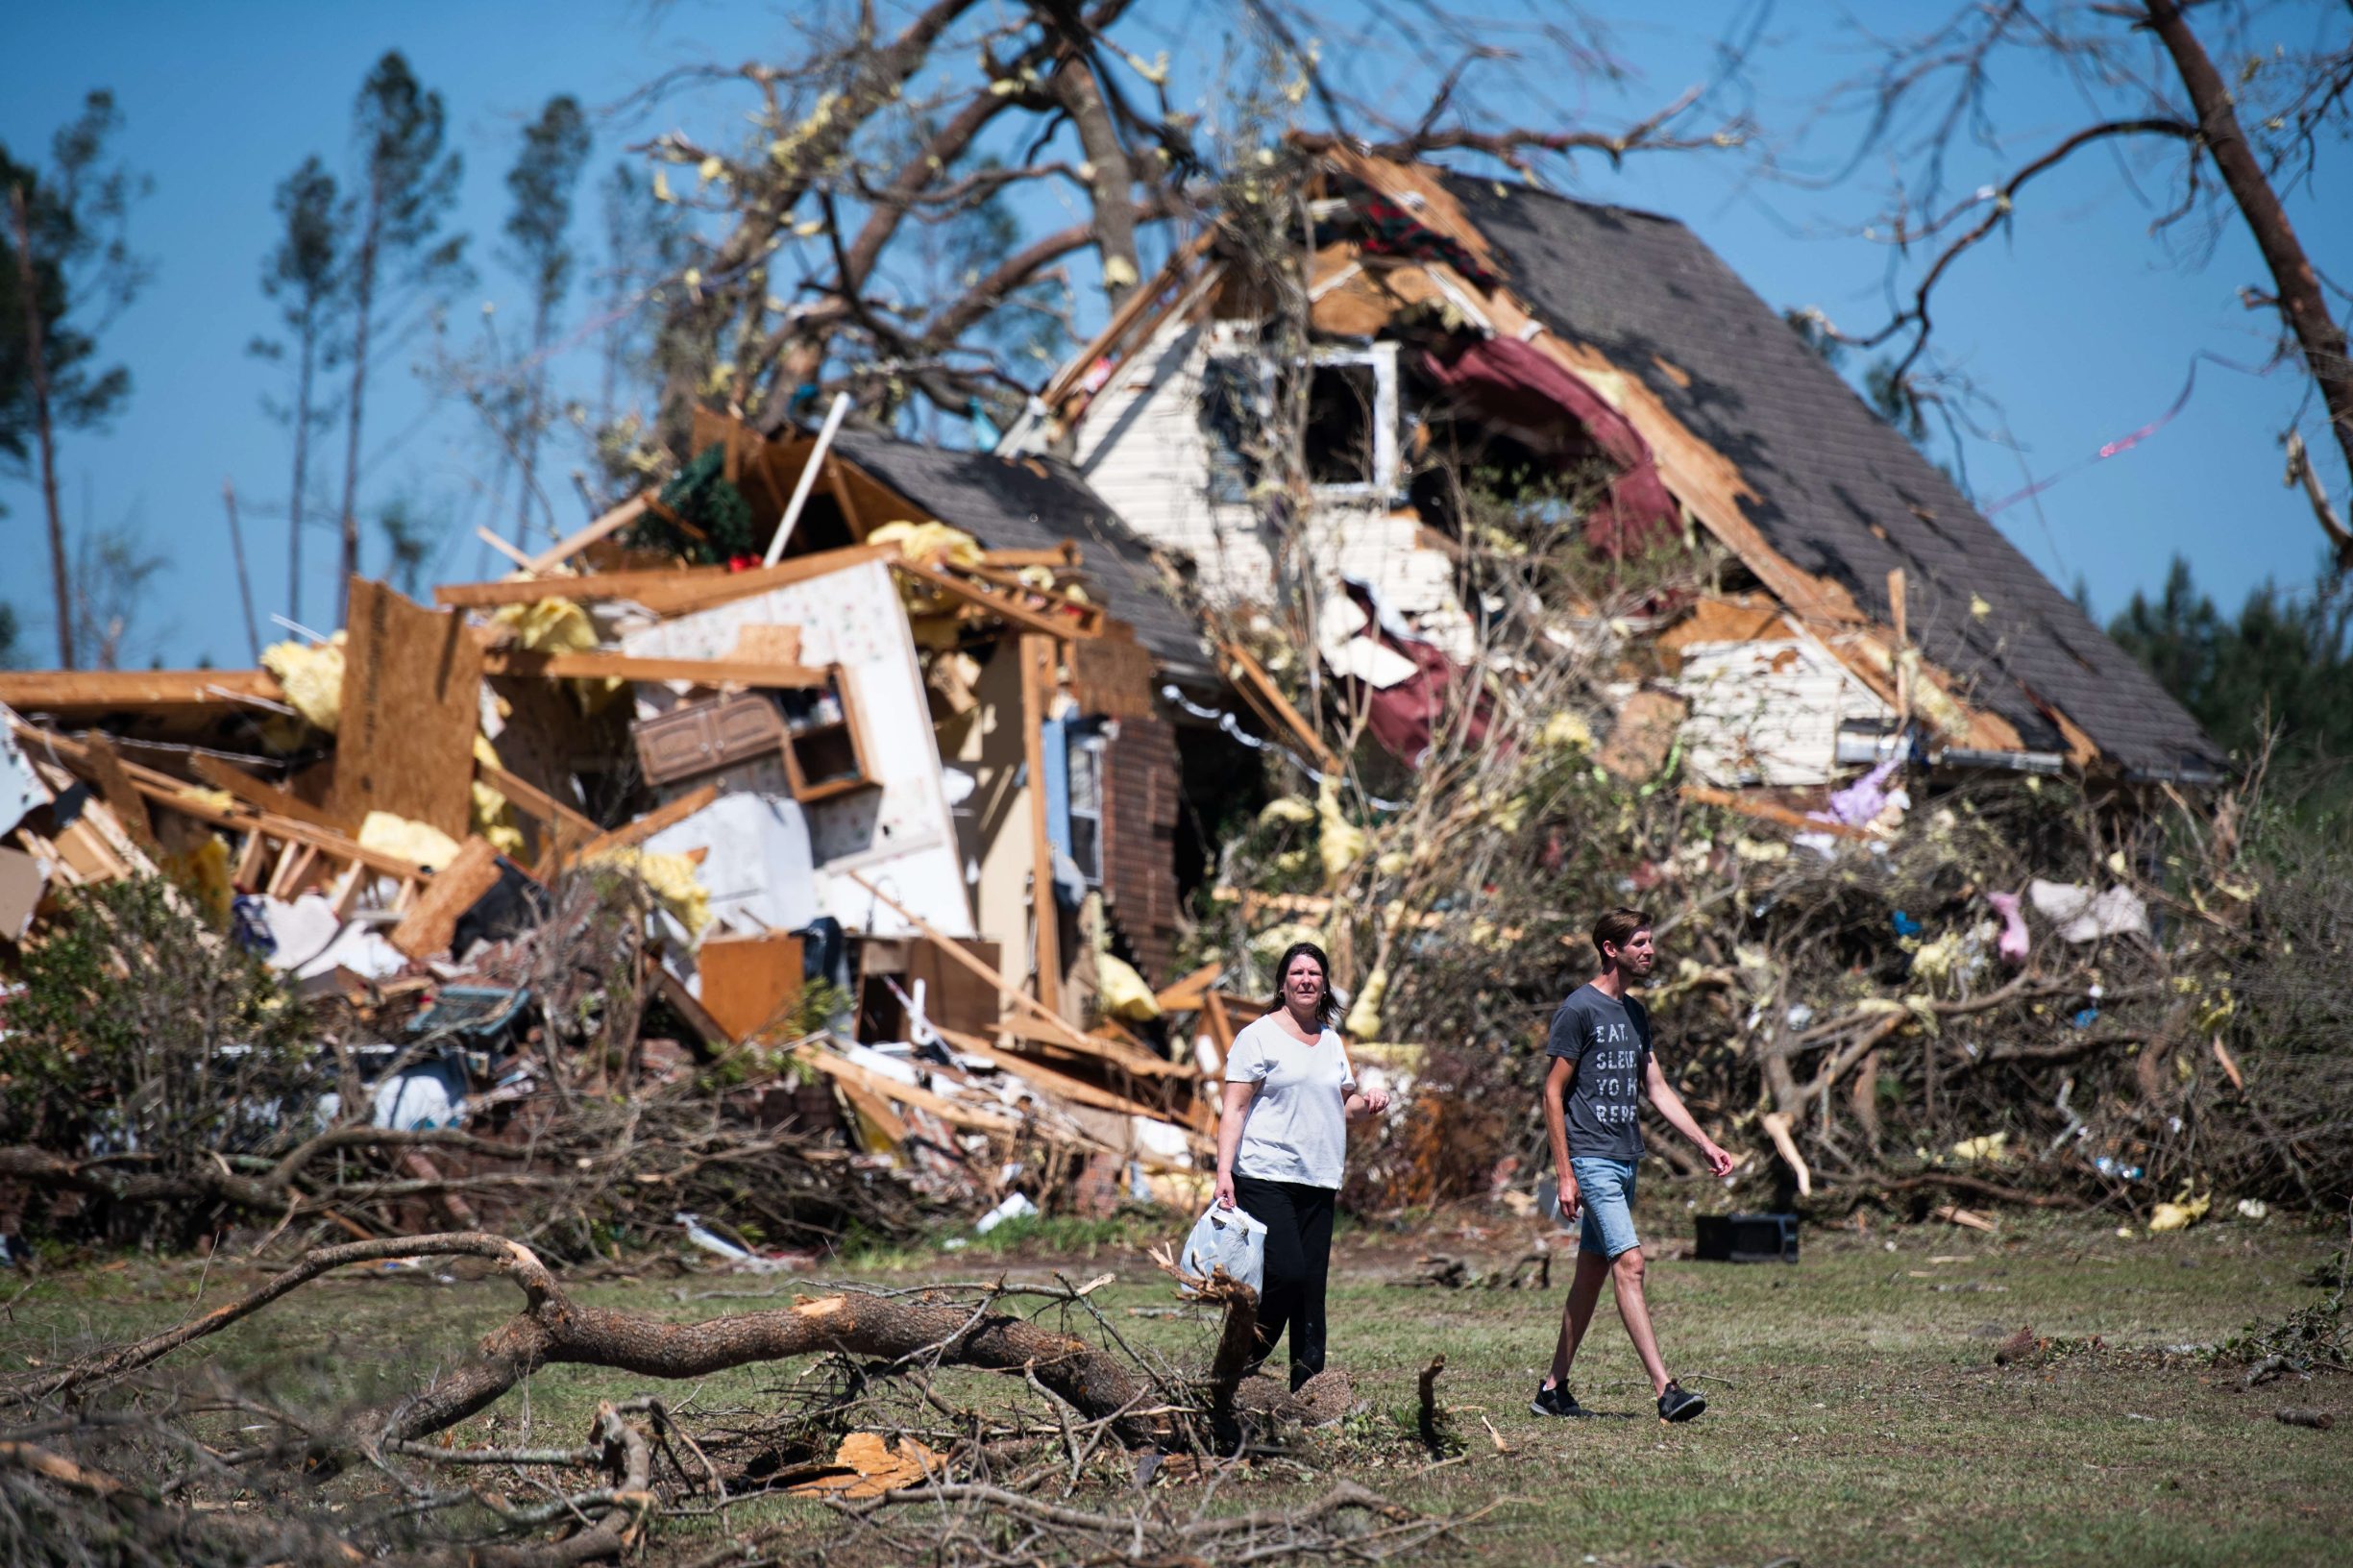 NIXVILLE, SC - APRIL 13: People walk in front of a home destroyed by a tornado on April 13, 2020 near Nixville, South Carolina. A string of storms across the southern United States that began Easter Sunday and continued into today produced multiple tornados resulting in more than 30 deaths and dozens more injuries.   Sean Rayford/Getty Images/AFP
== FOR NEWSPAPERS, INTERNET, TELCOS & TELEVISION USE ONLY ==